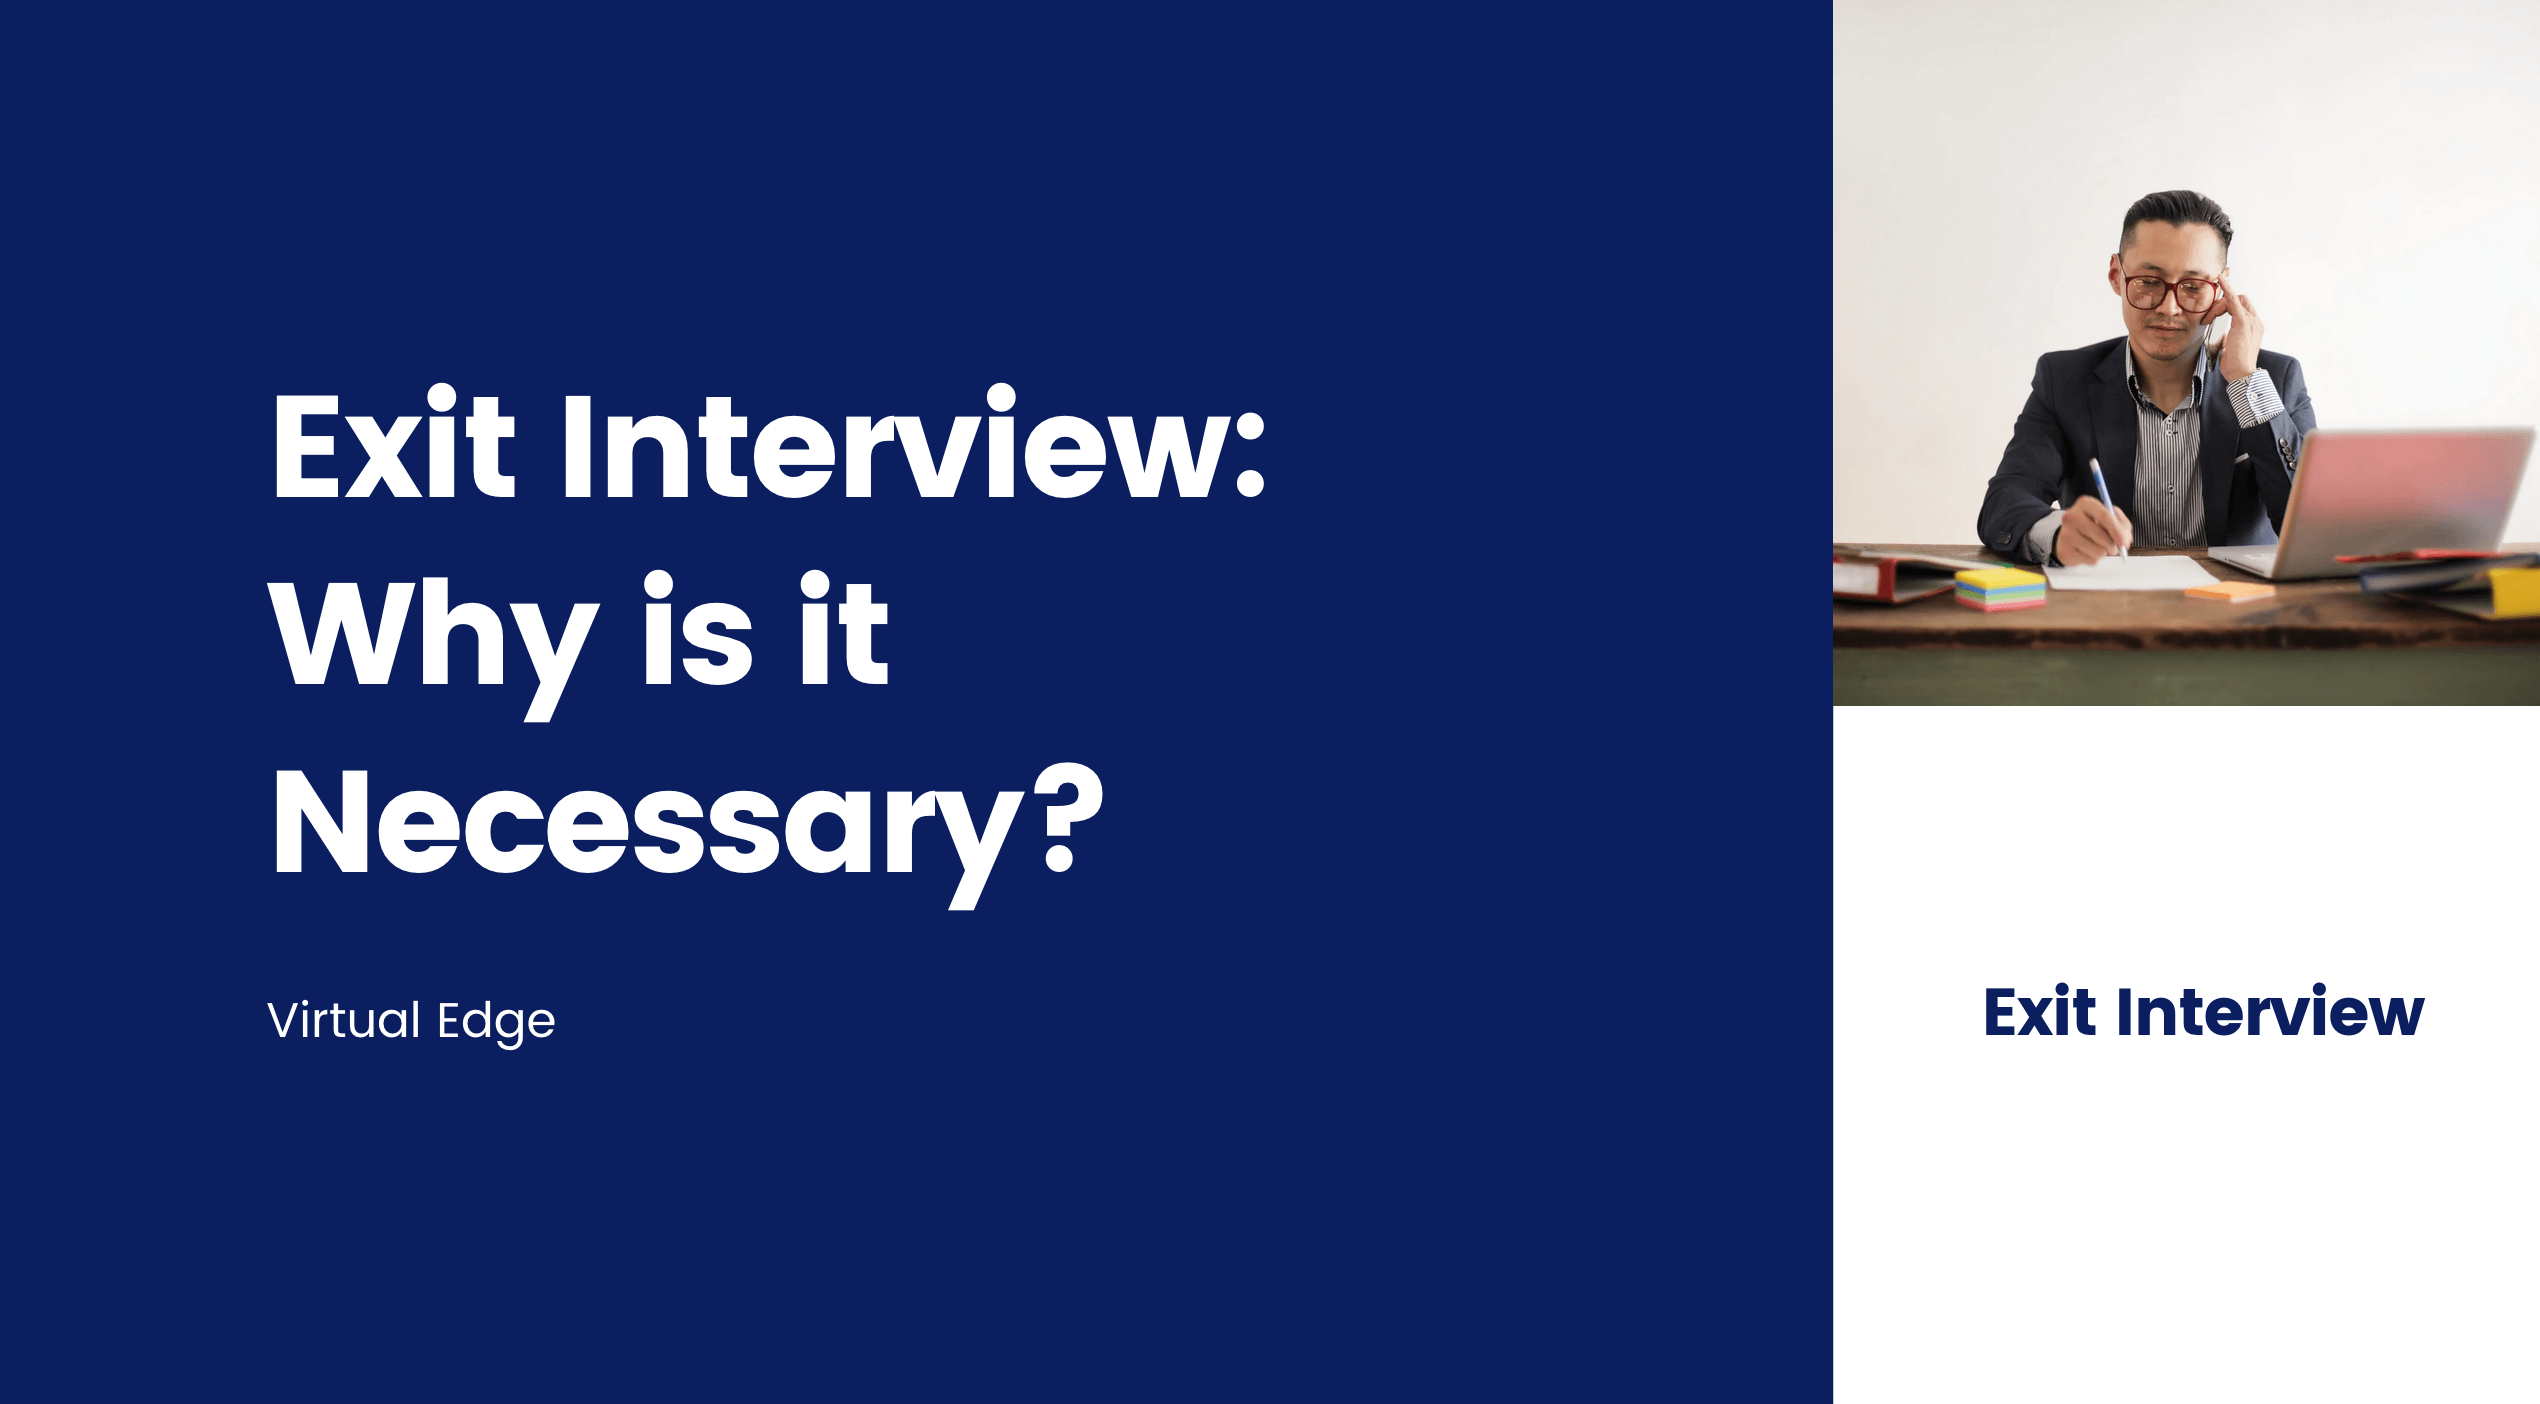 Exit Interview: Why is it Necessary?